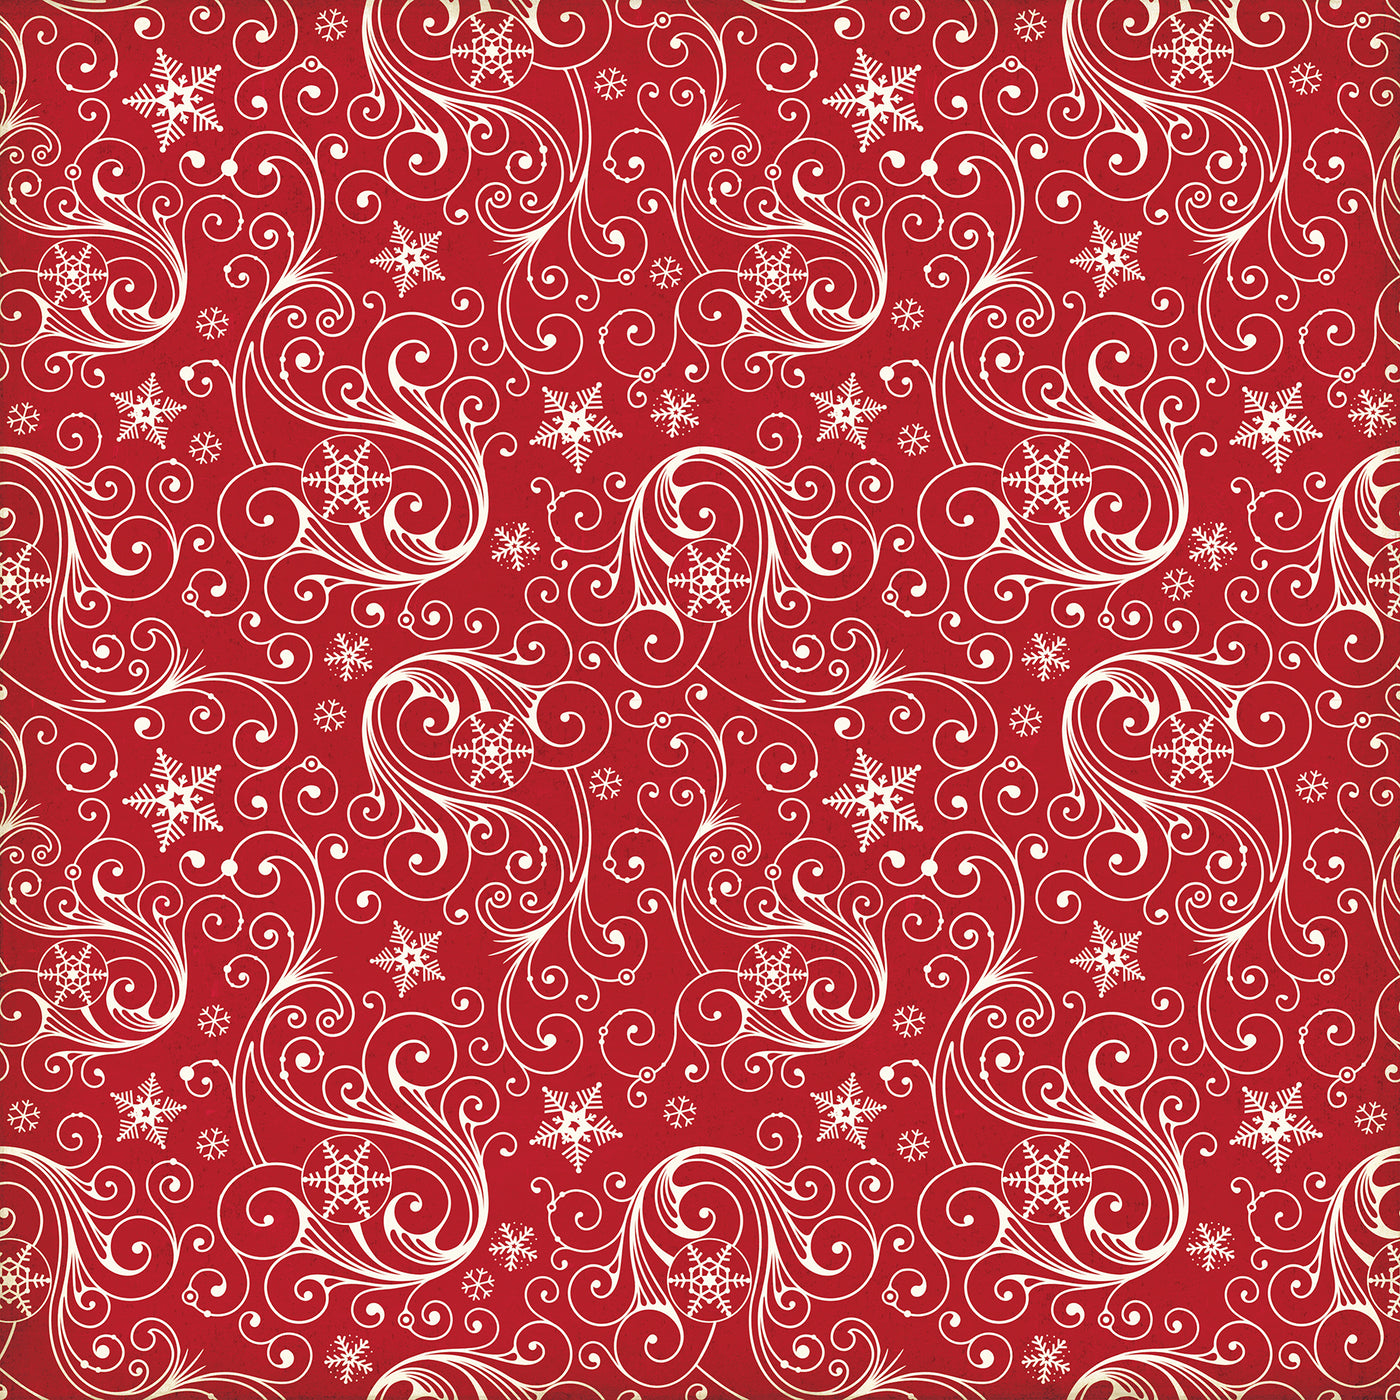 Side A - white swirls, snowflakes, and stars on a red background